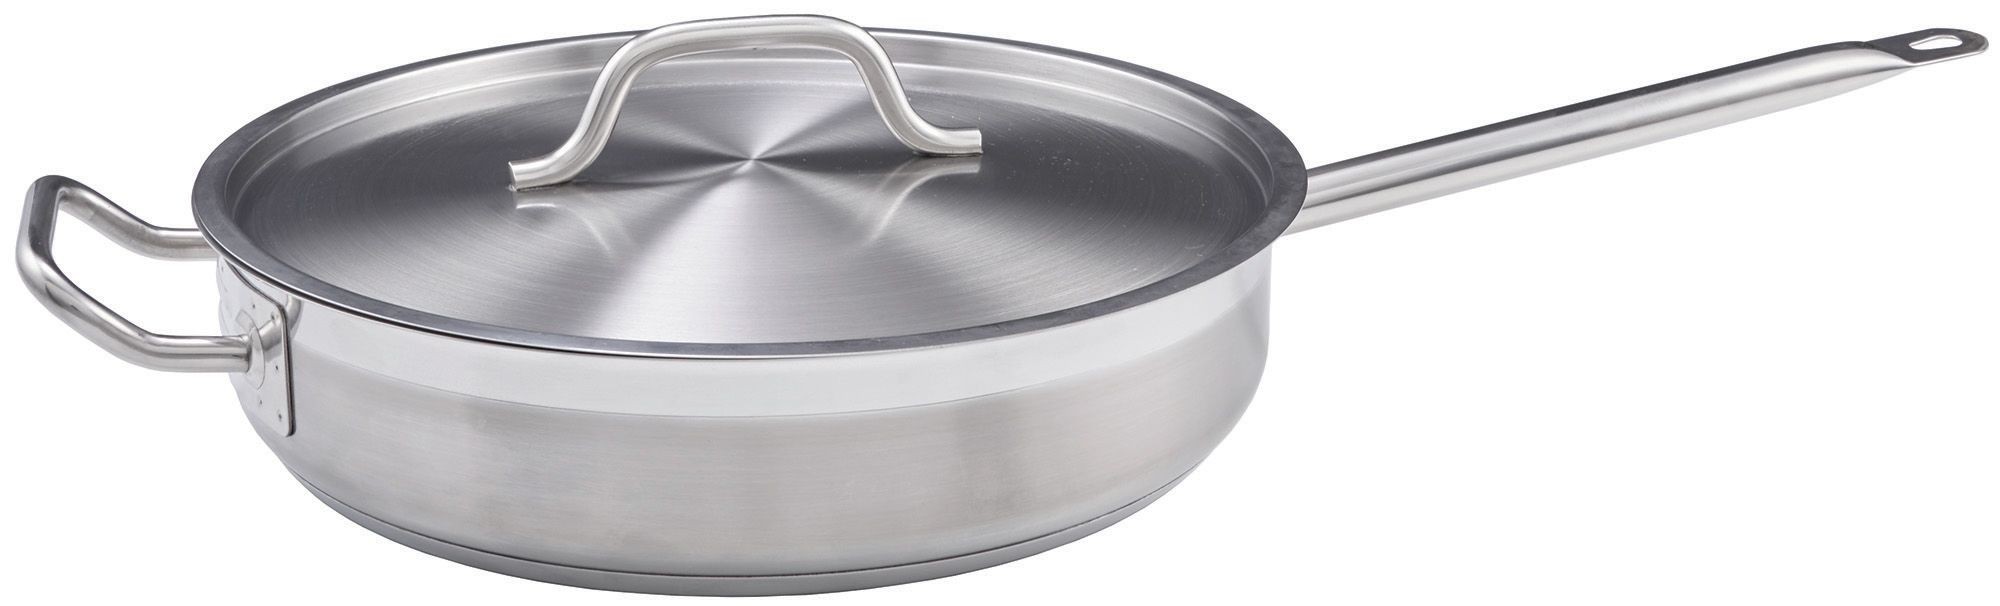 Winco SSET-7 Stainless Steel 7 Qt. Saute´ Pan with Cover